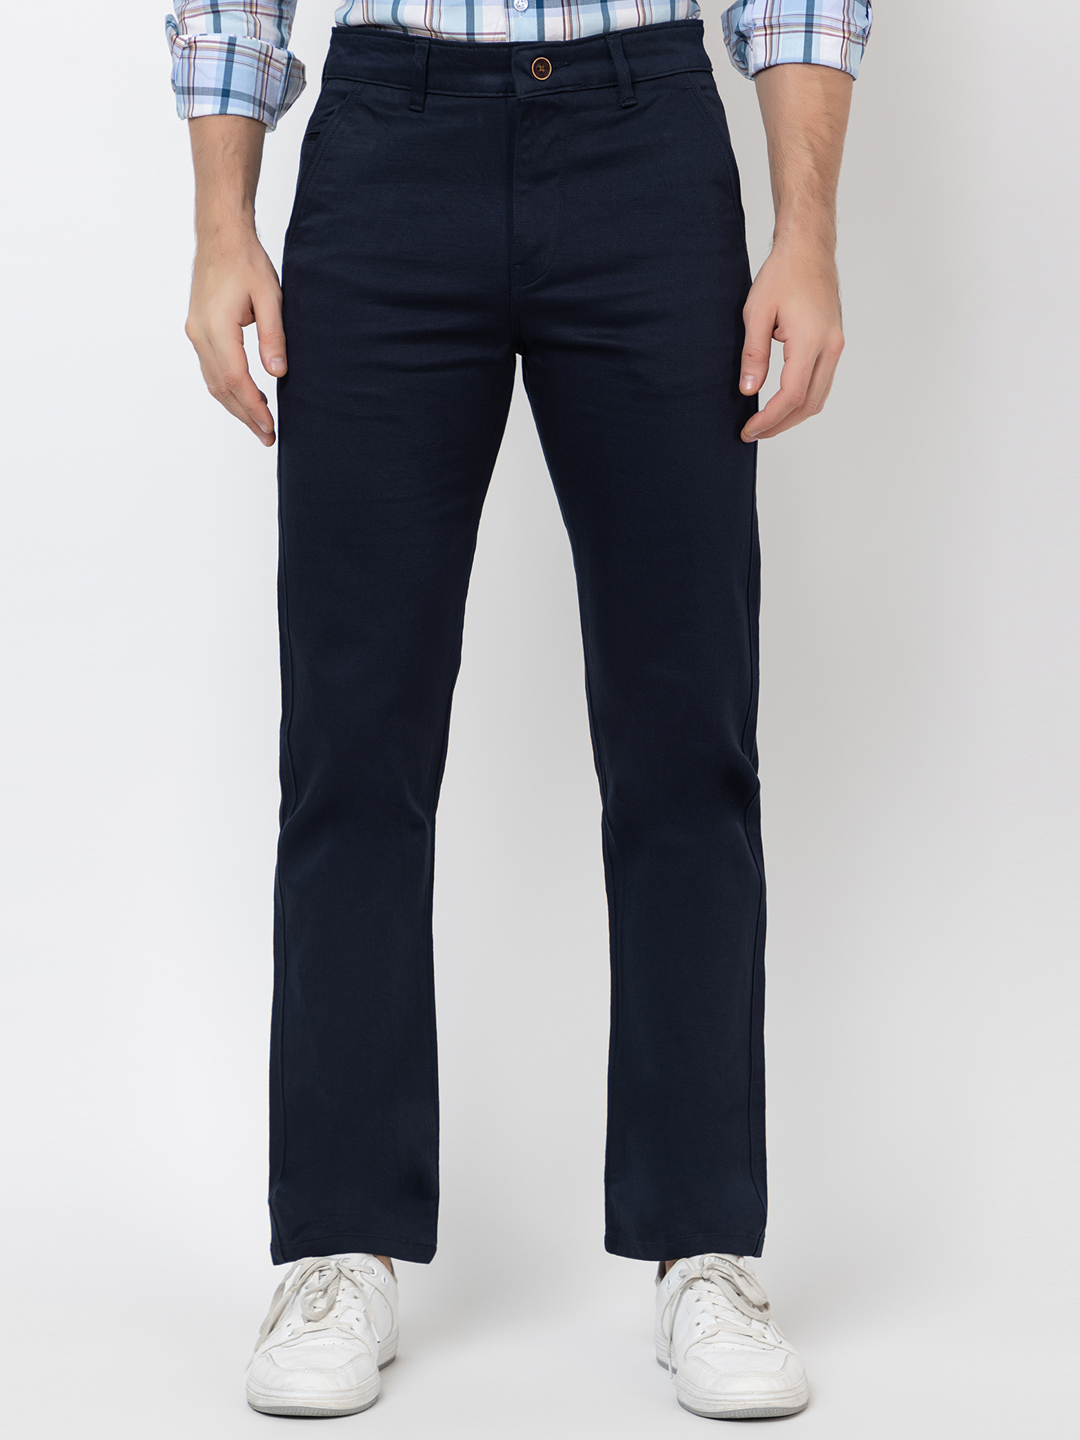 Buy Navy Blue Chinos Pant For Men Online In India - ExperianceClothing